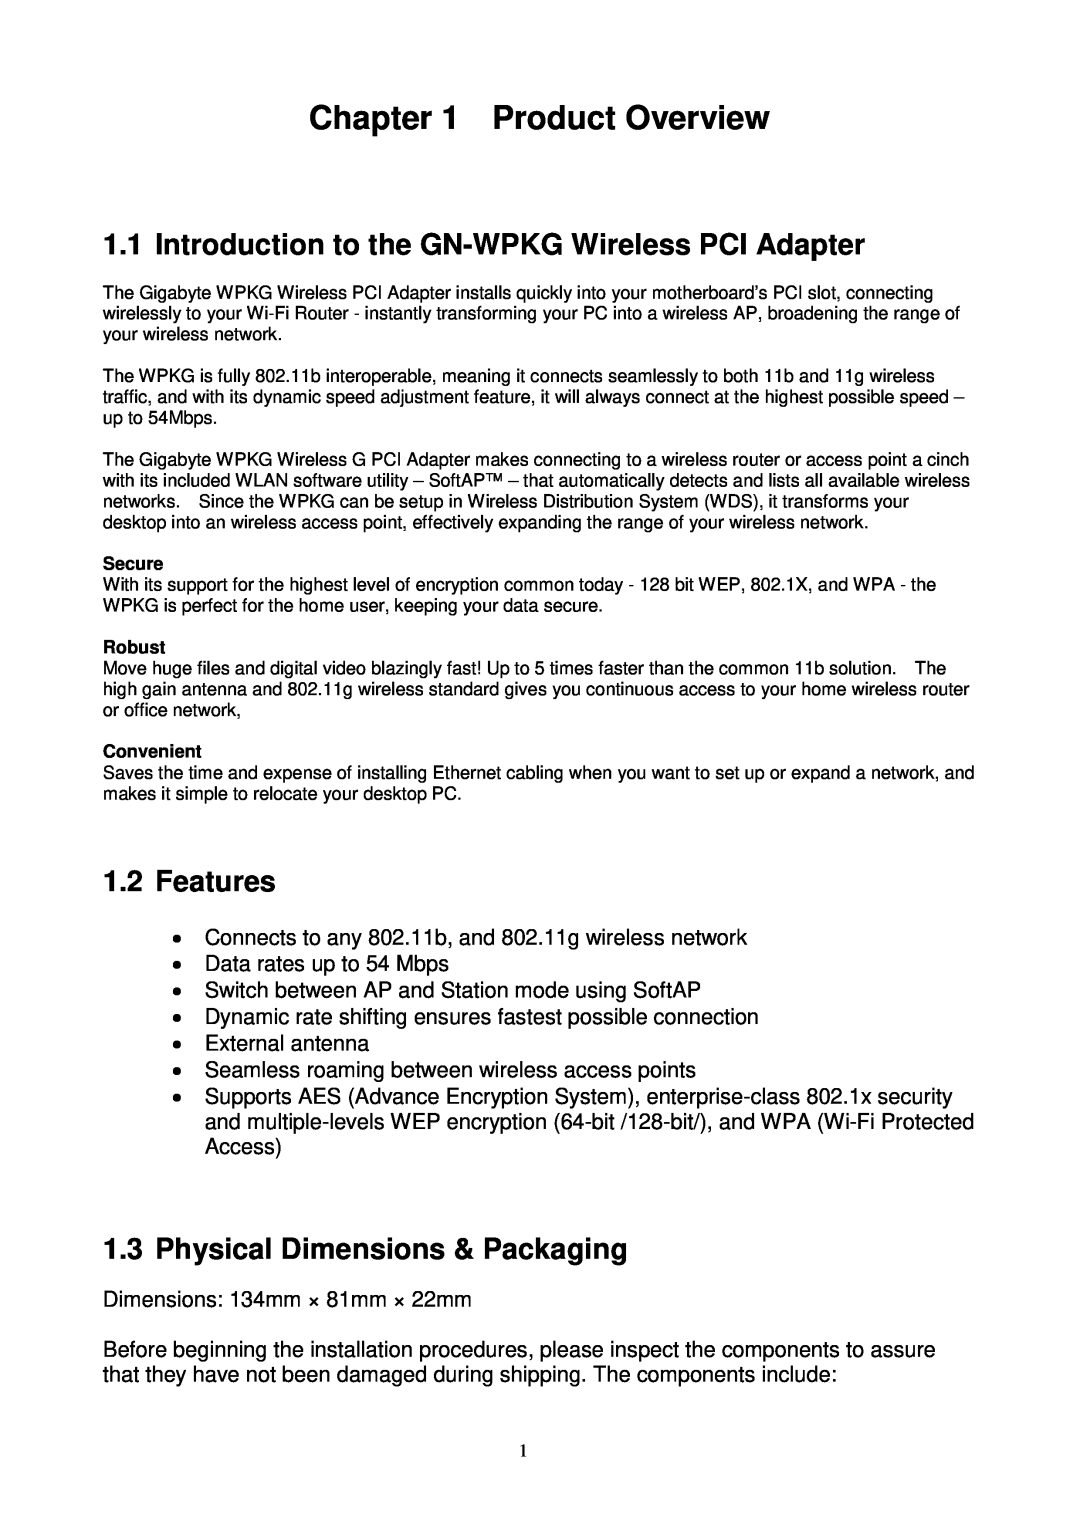 Gigabyte Product Overview, Introduction to the GN-WPKG Wireless PCI Adapter, Features, Physical Dimensions & Packaging 